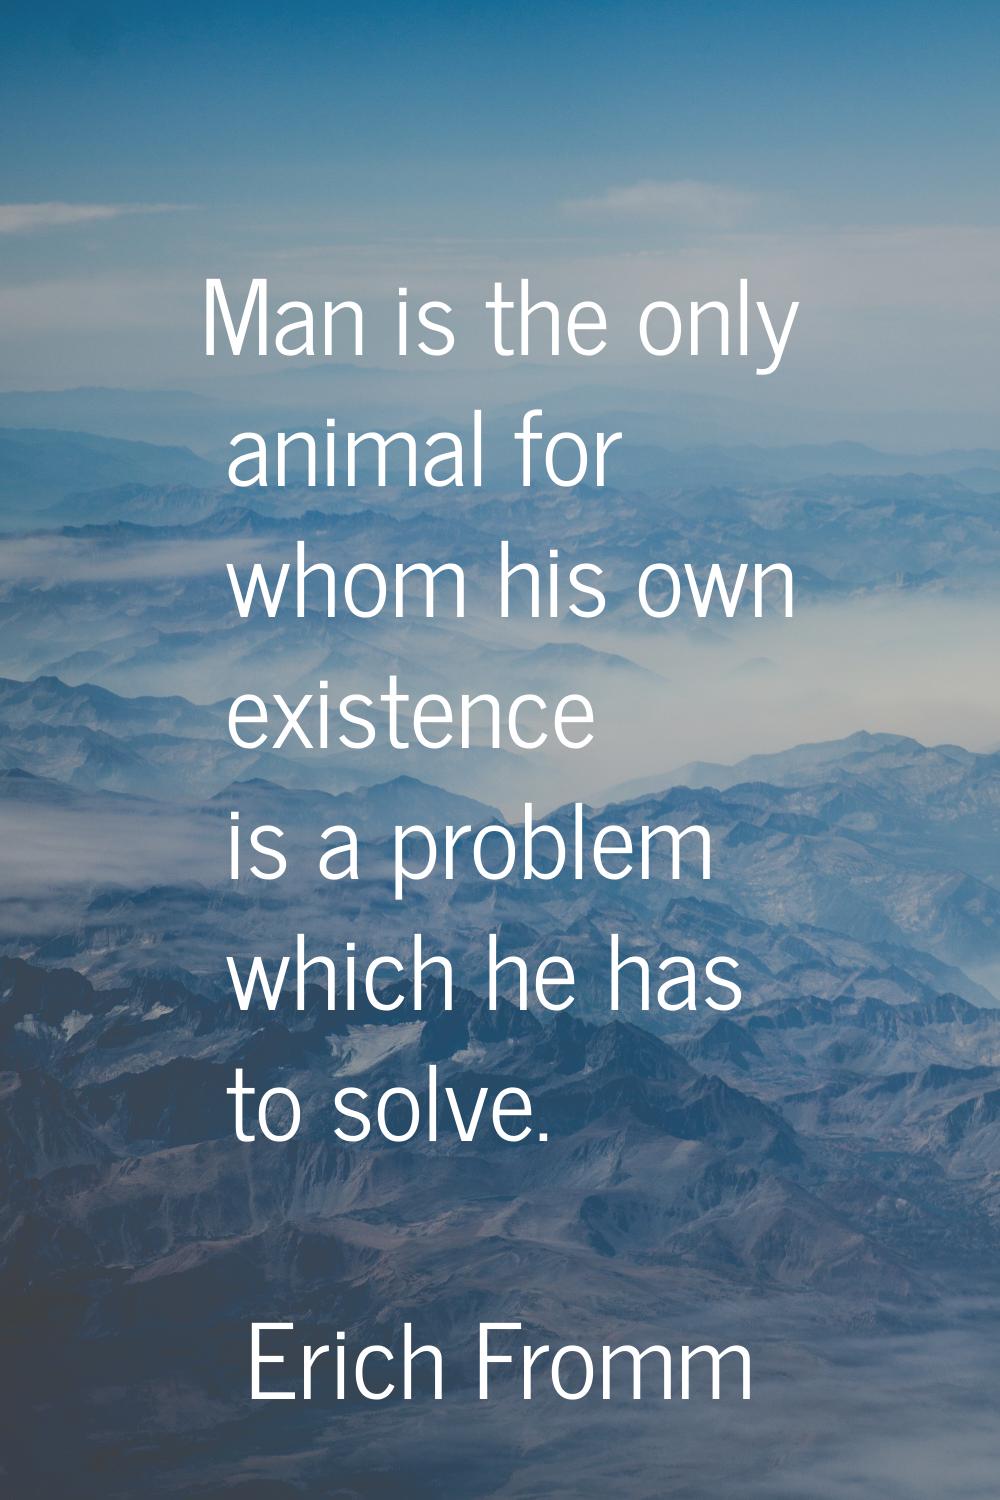 Man is the only animal for whom his own existence is a problem which he has to solve.